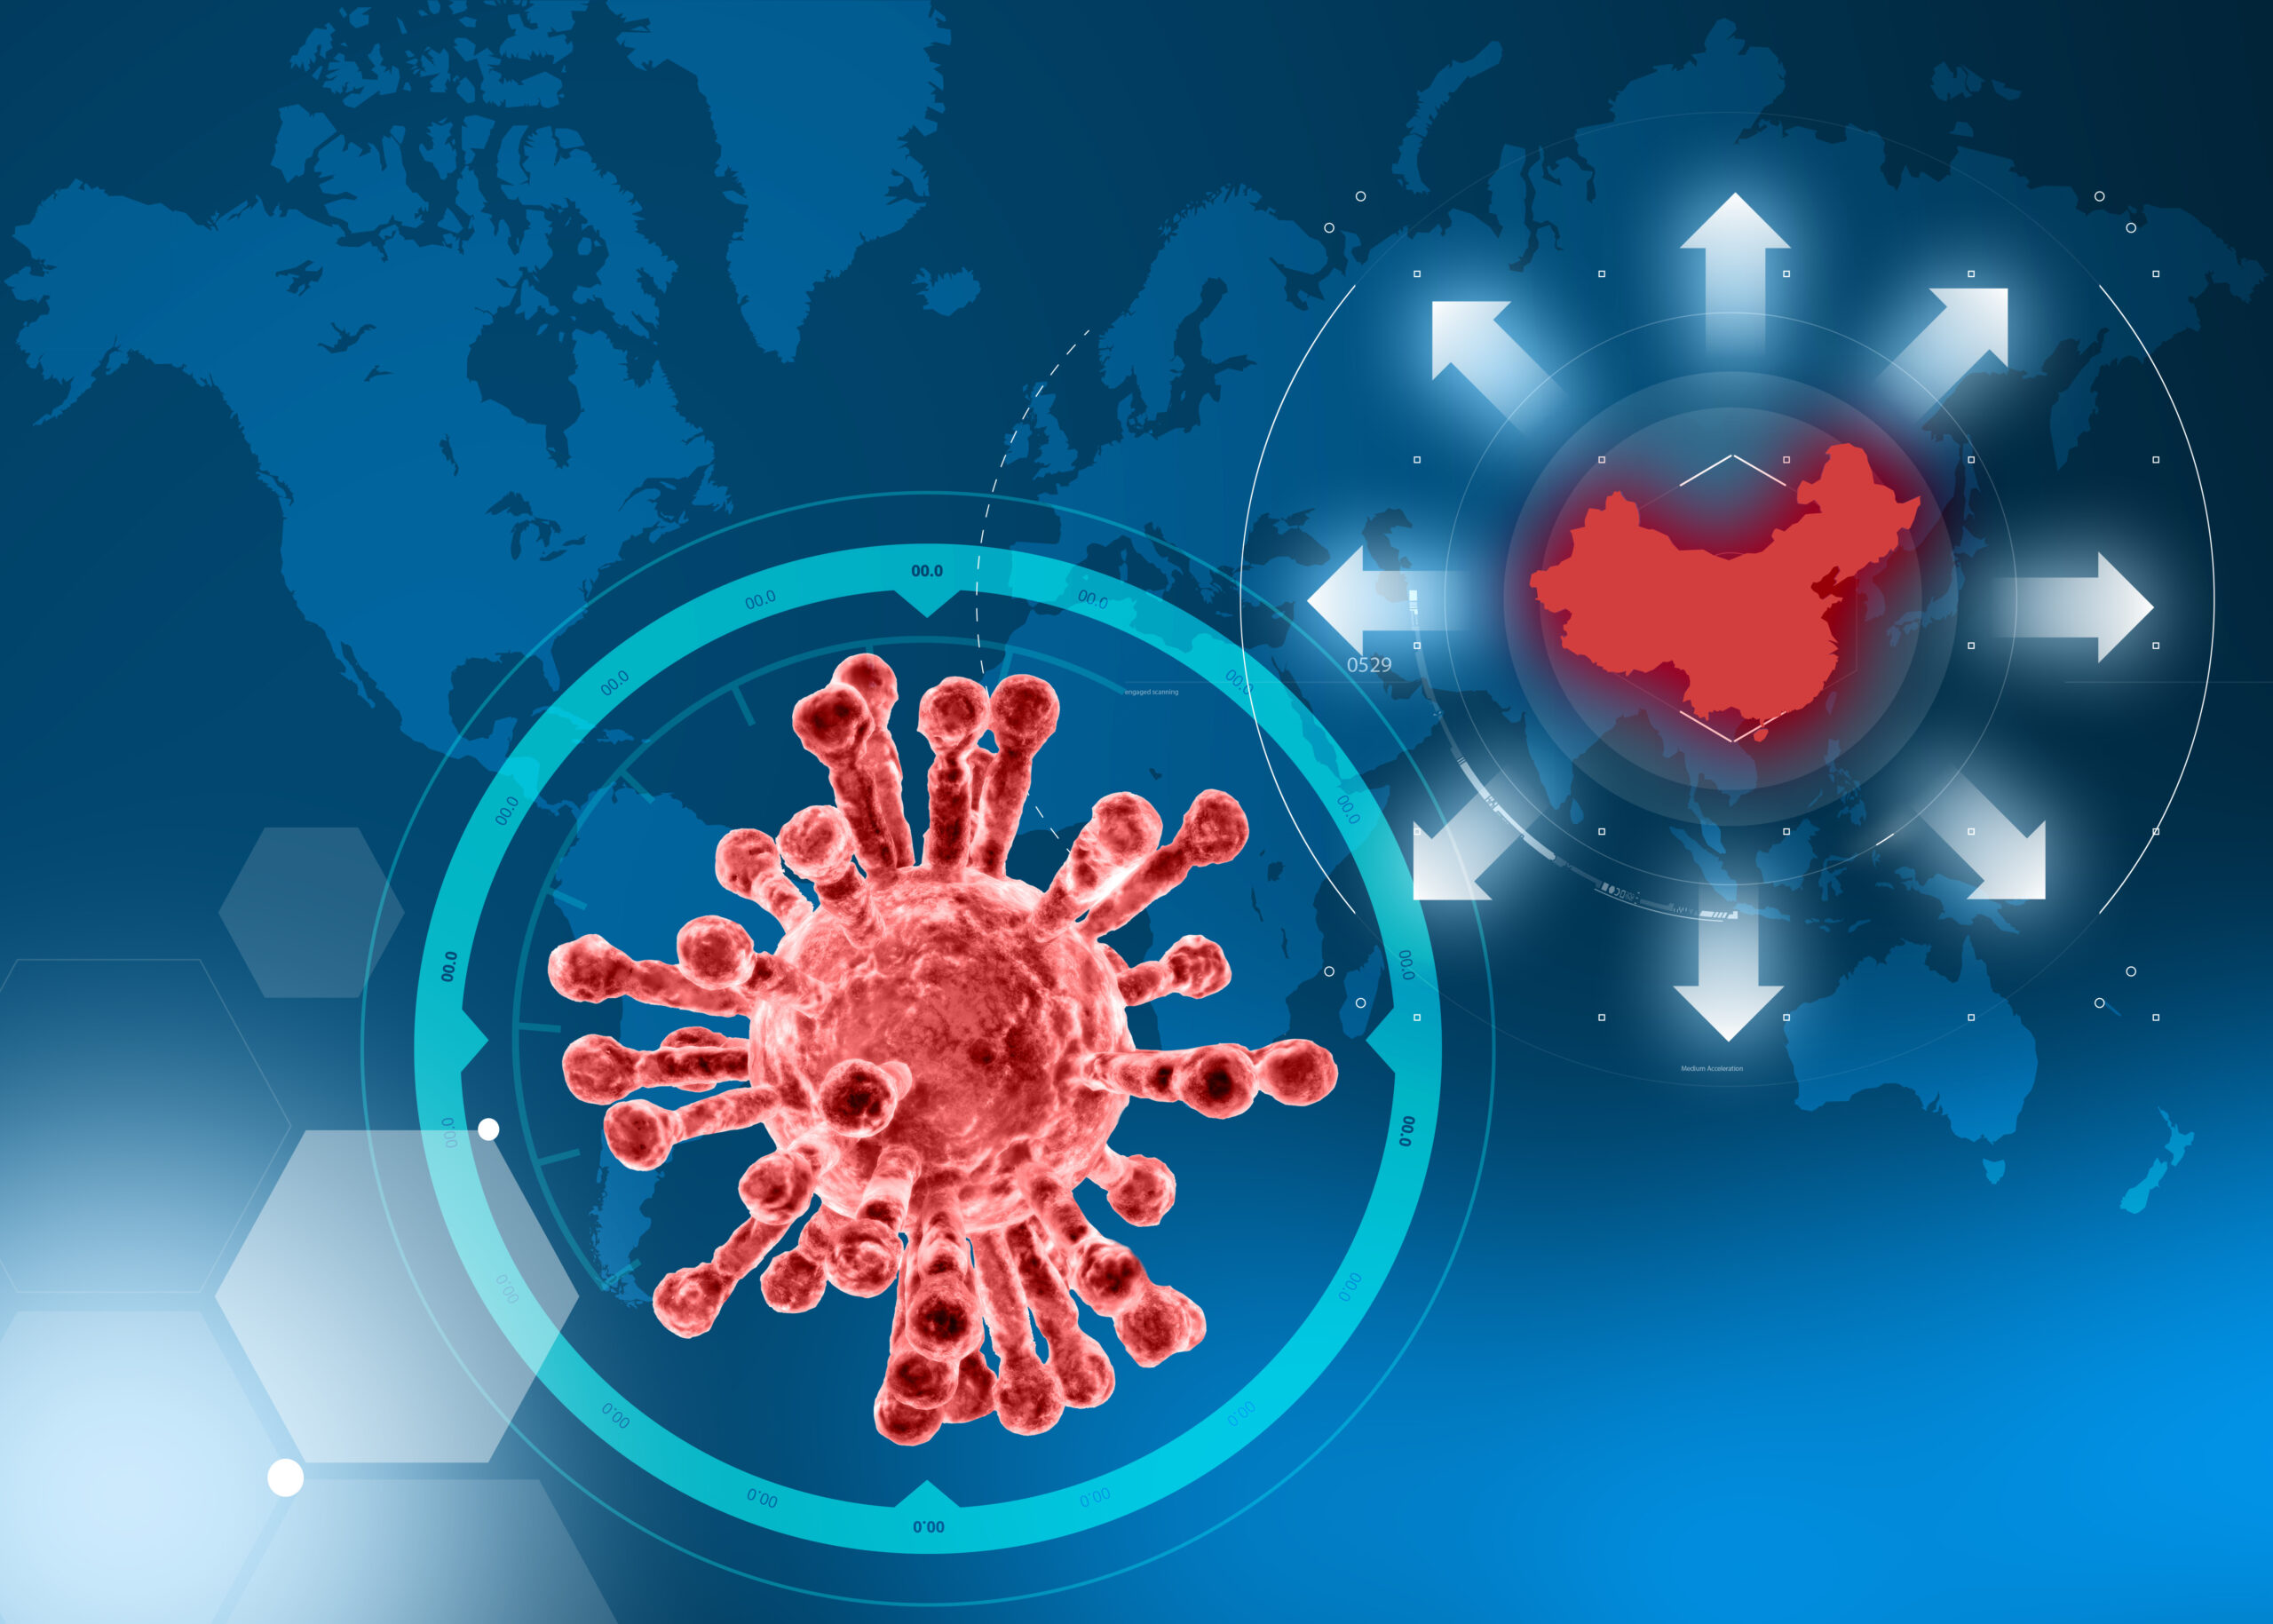 CDC Expert Says Coronavirus Is Not Controllable & Will Spread